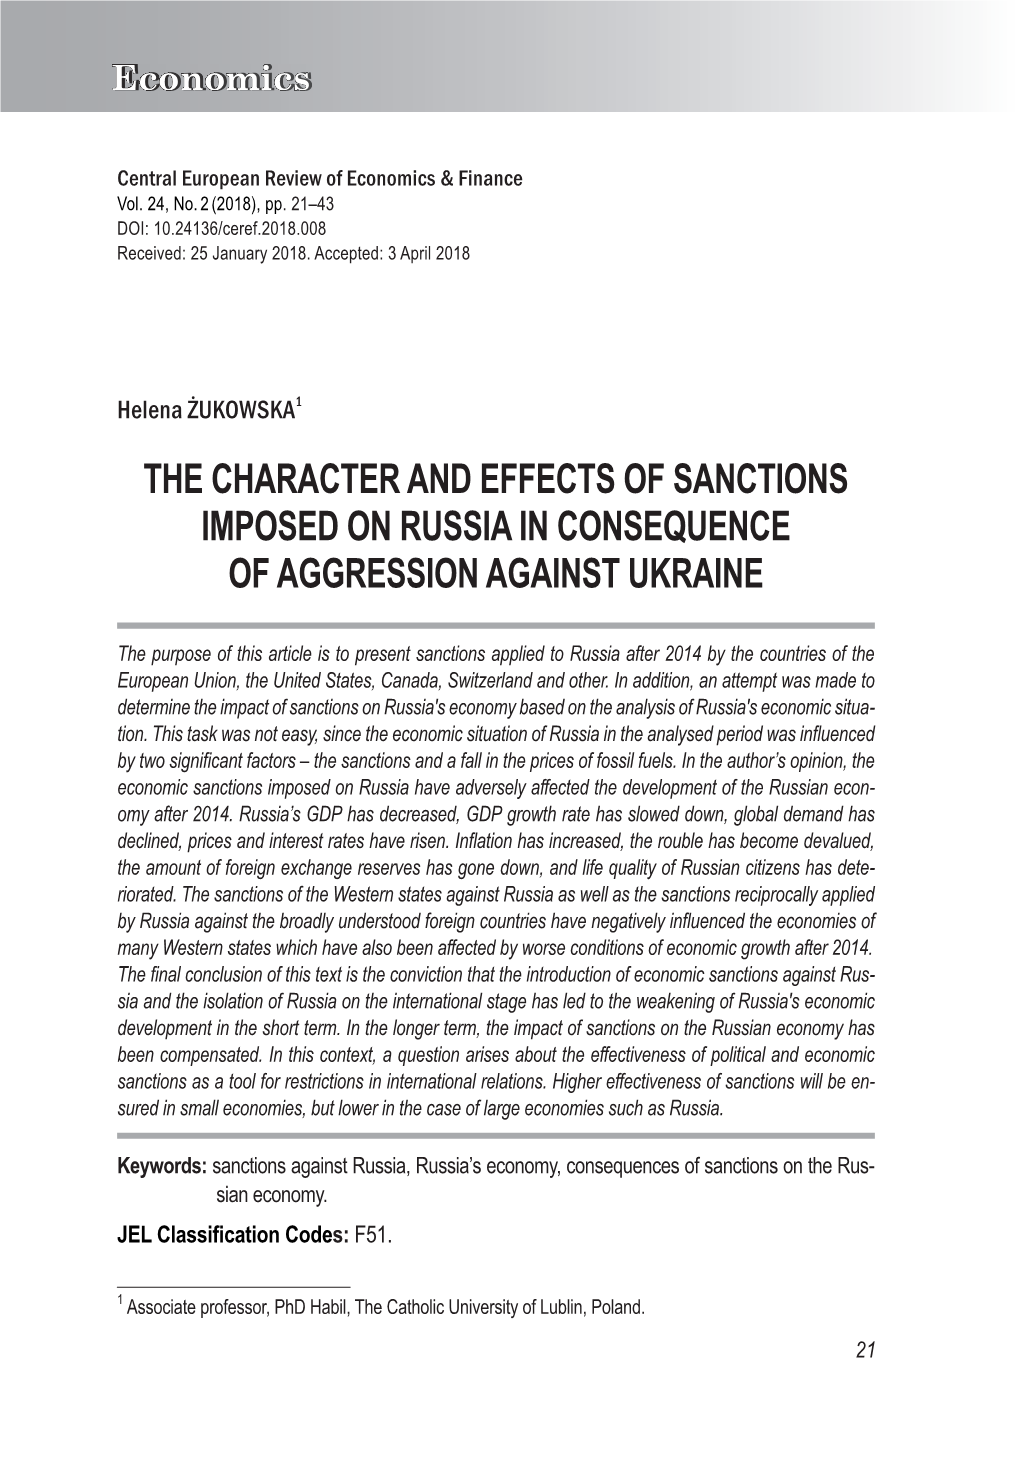 The Character and Effects of Sanctions Imposed on Russia in Consequence of Aggression Against Ukraine